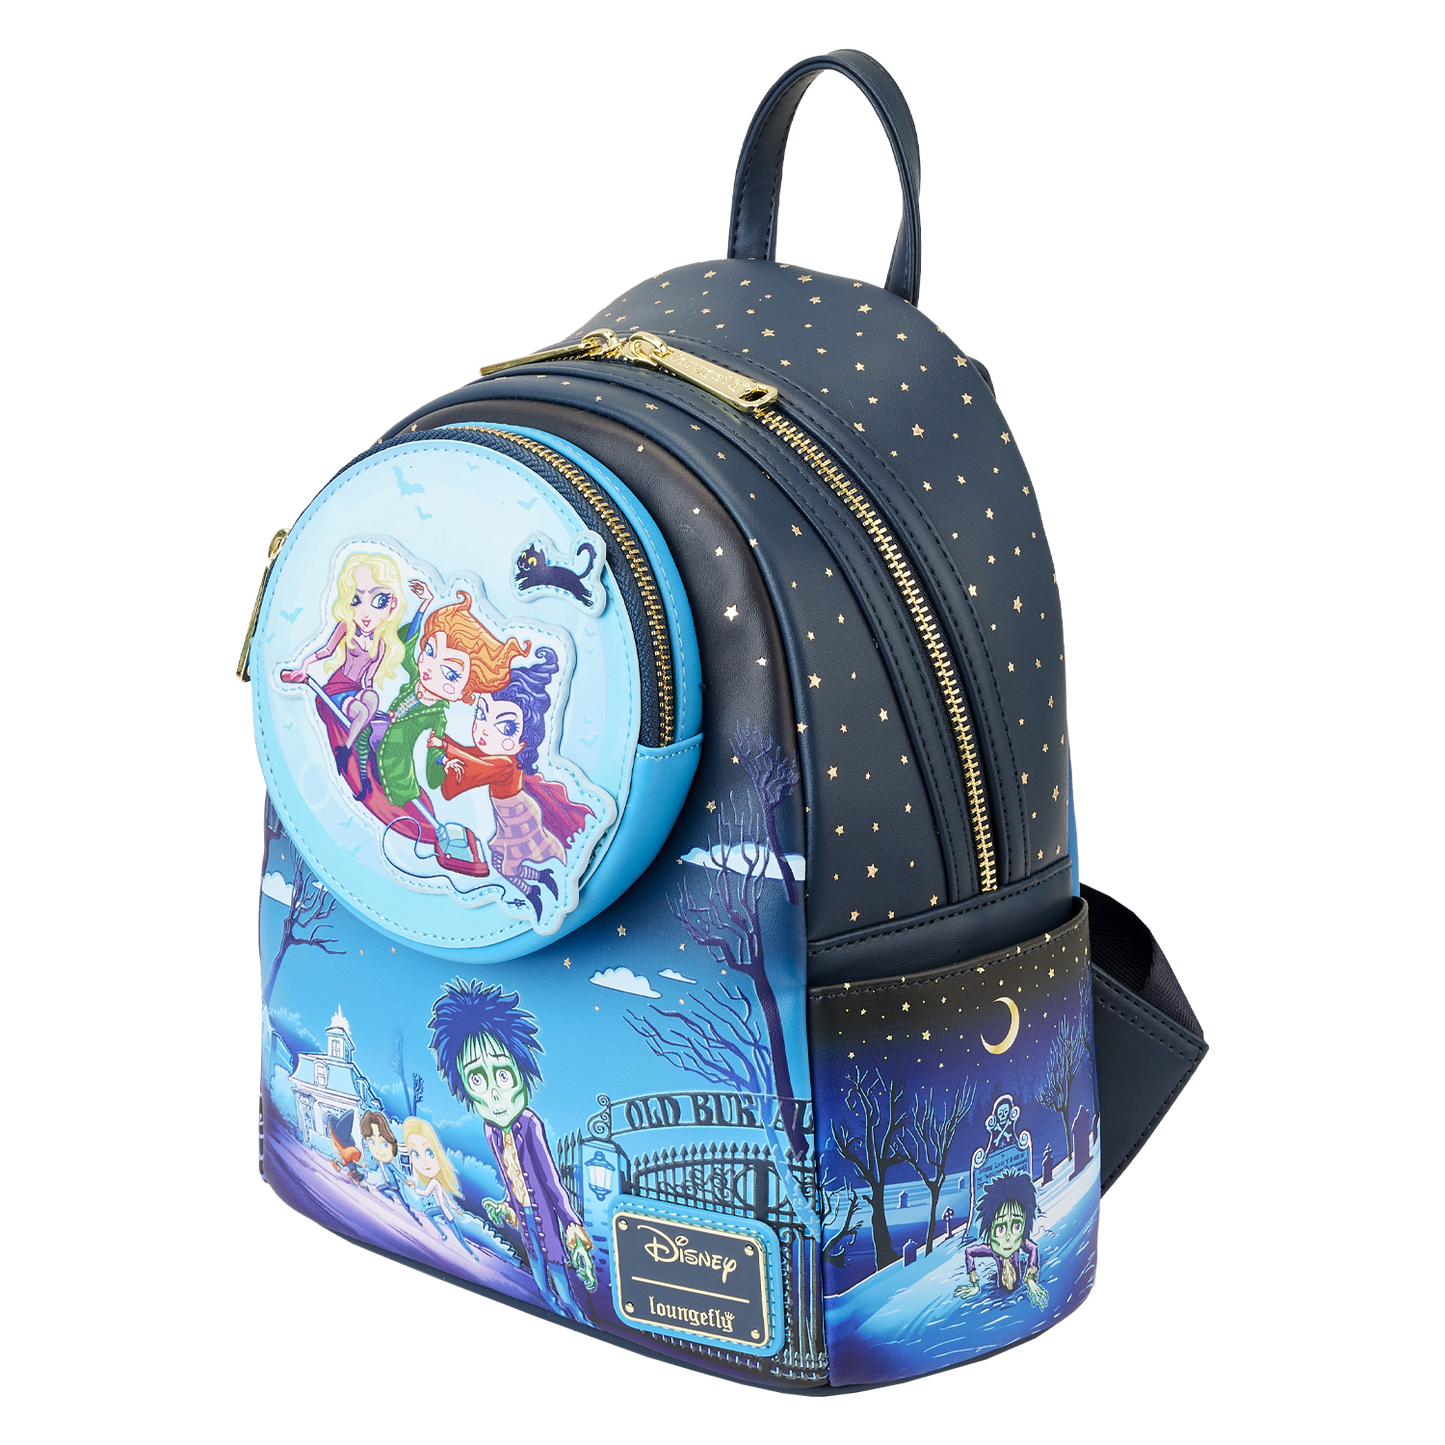 Loungefly x Disney Hocus Pocus Poster Mini Backpack